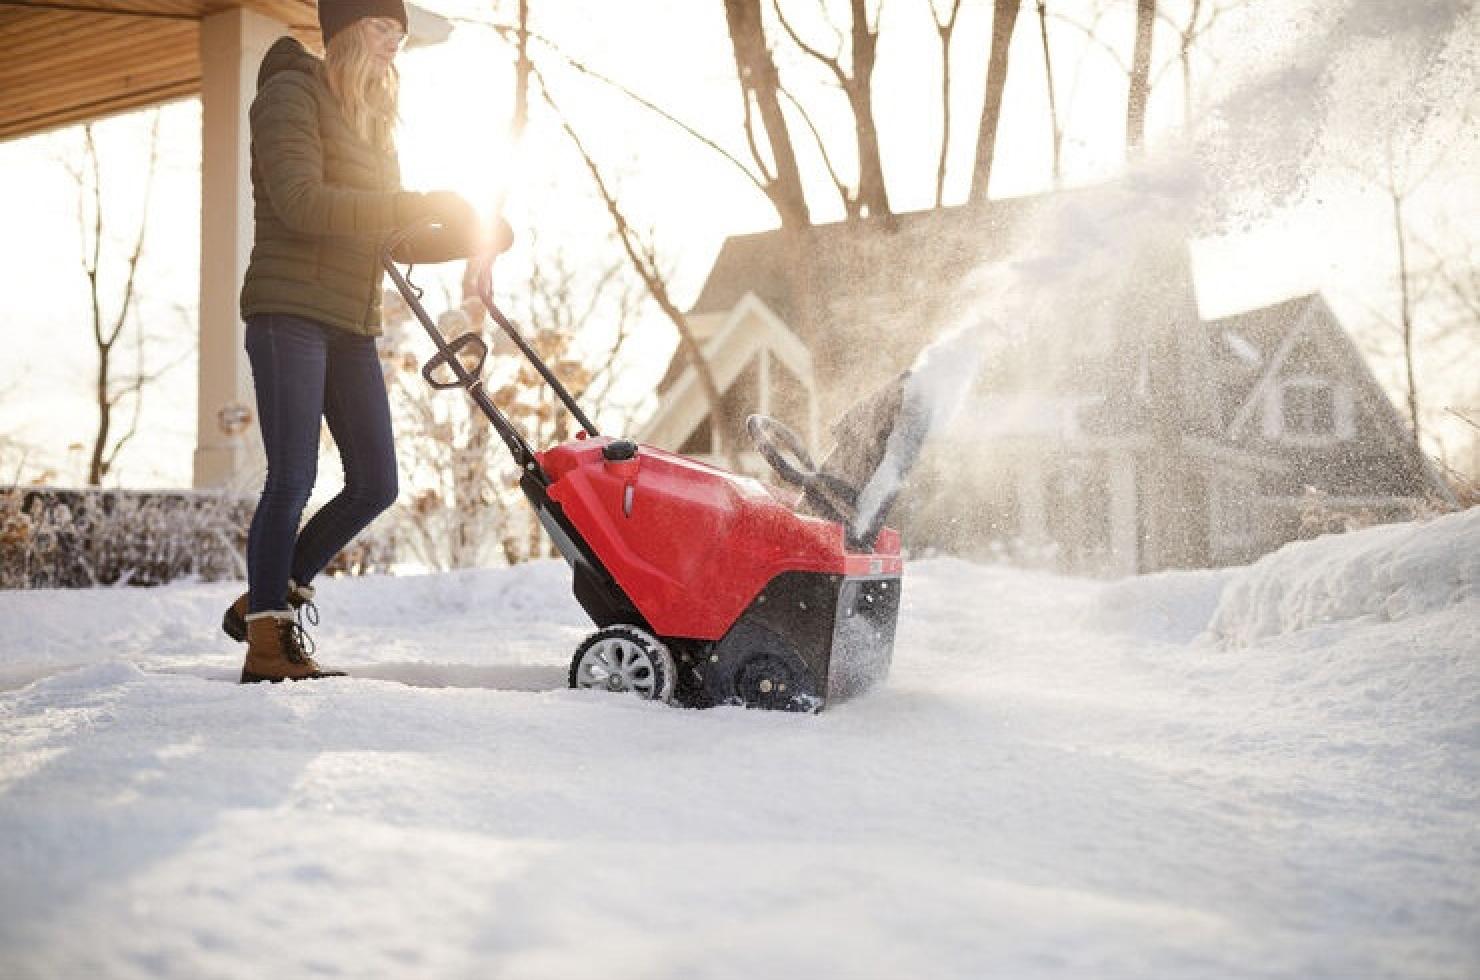 Troy-Bilt Squall 179E Single Stage Snow Blower